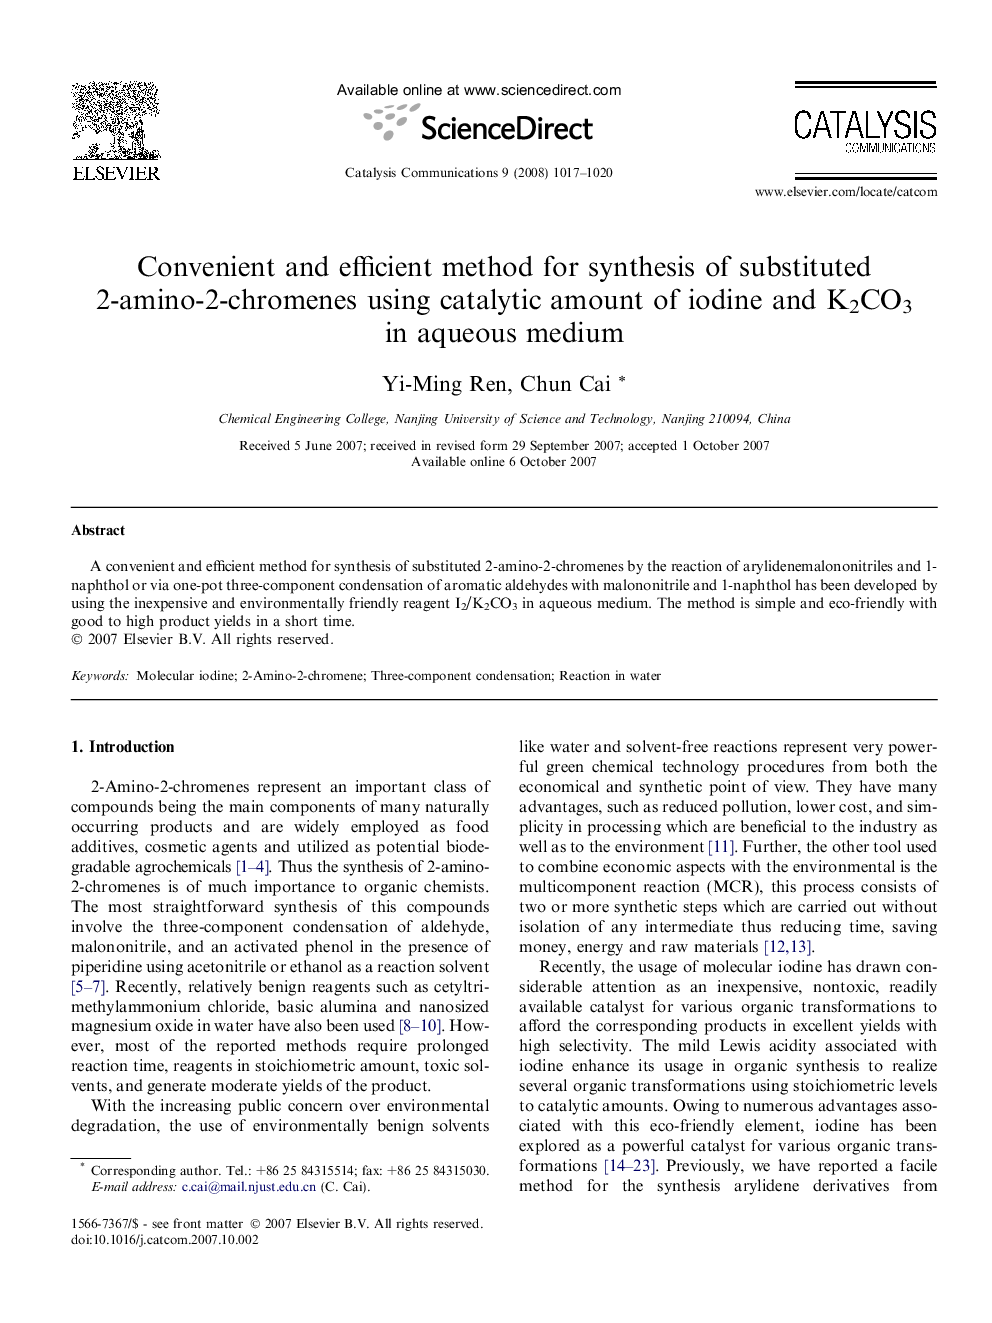 Convenient and efficient method for synthesis of substituted 2-amino-2-chromenes using catalytic amount of iodine and K2CO3 in aqueous medium